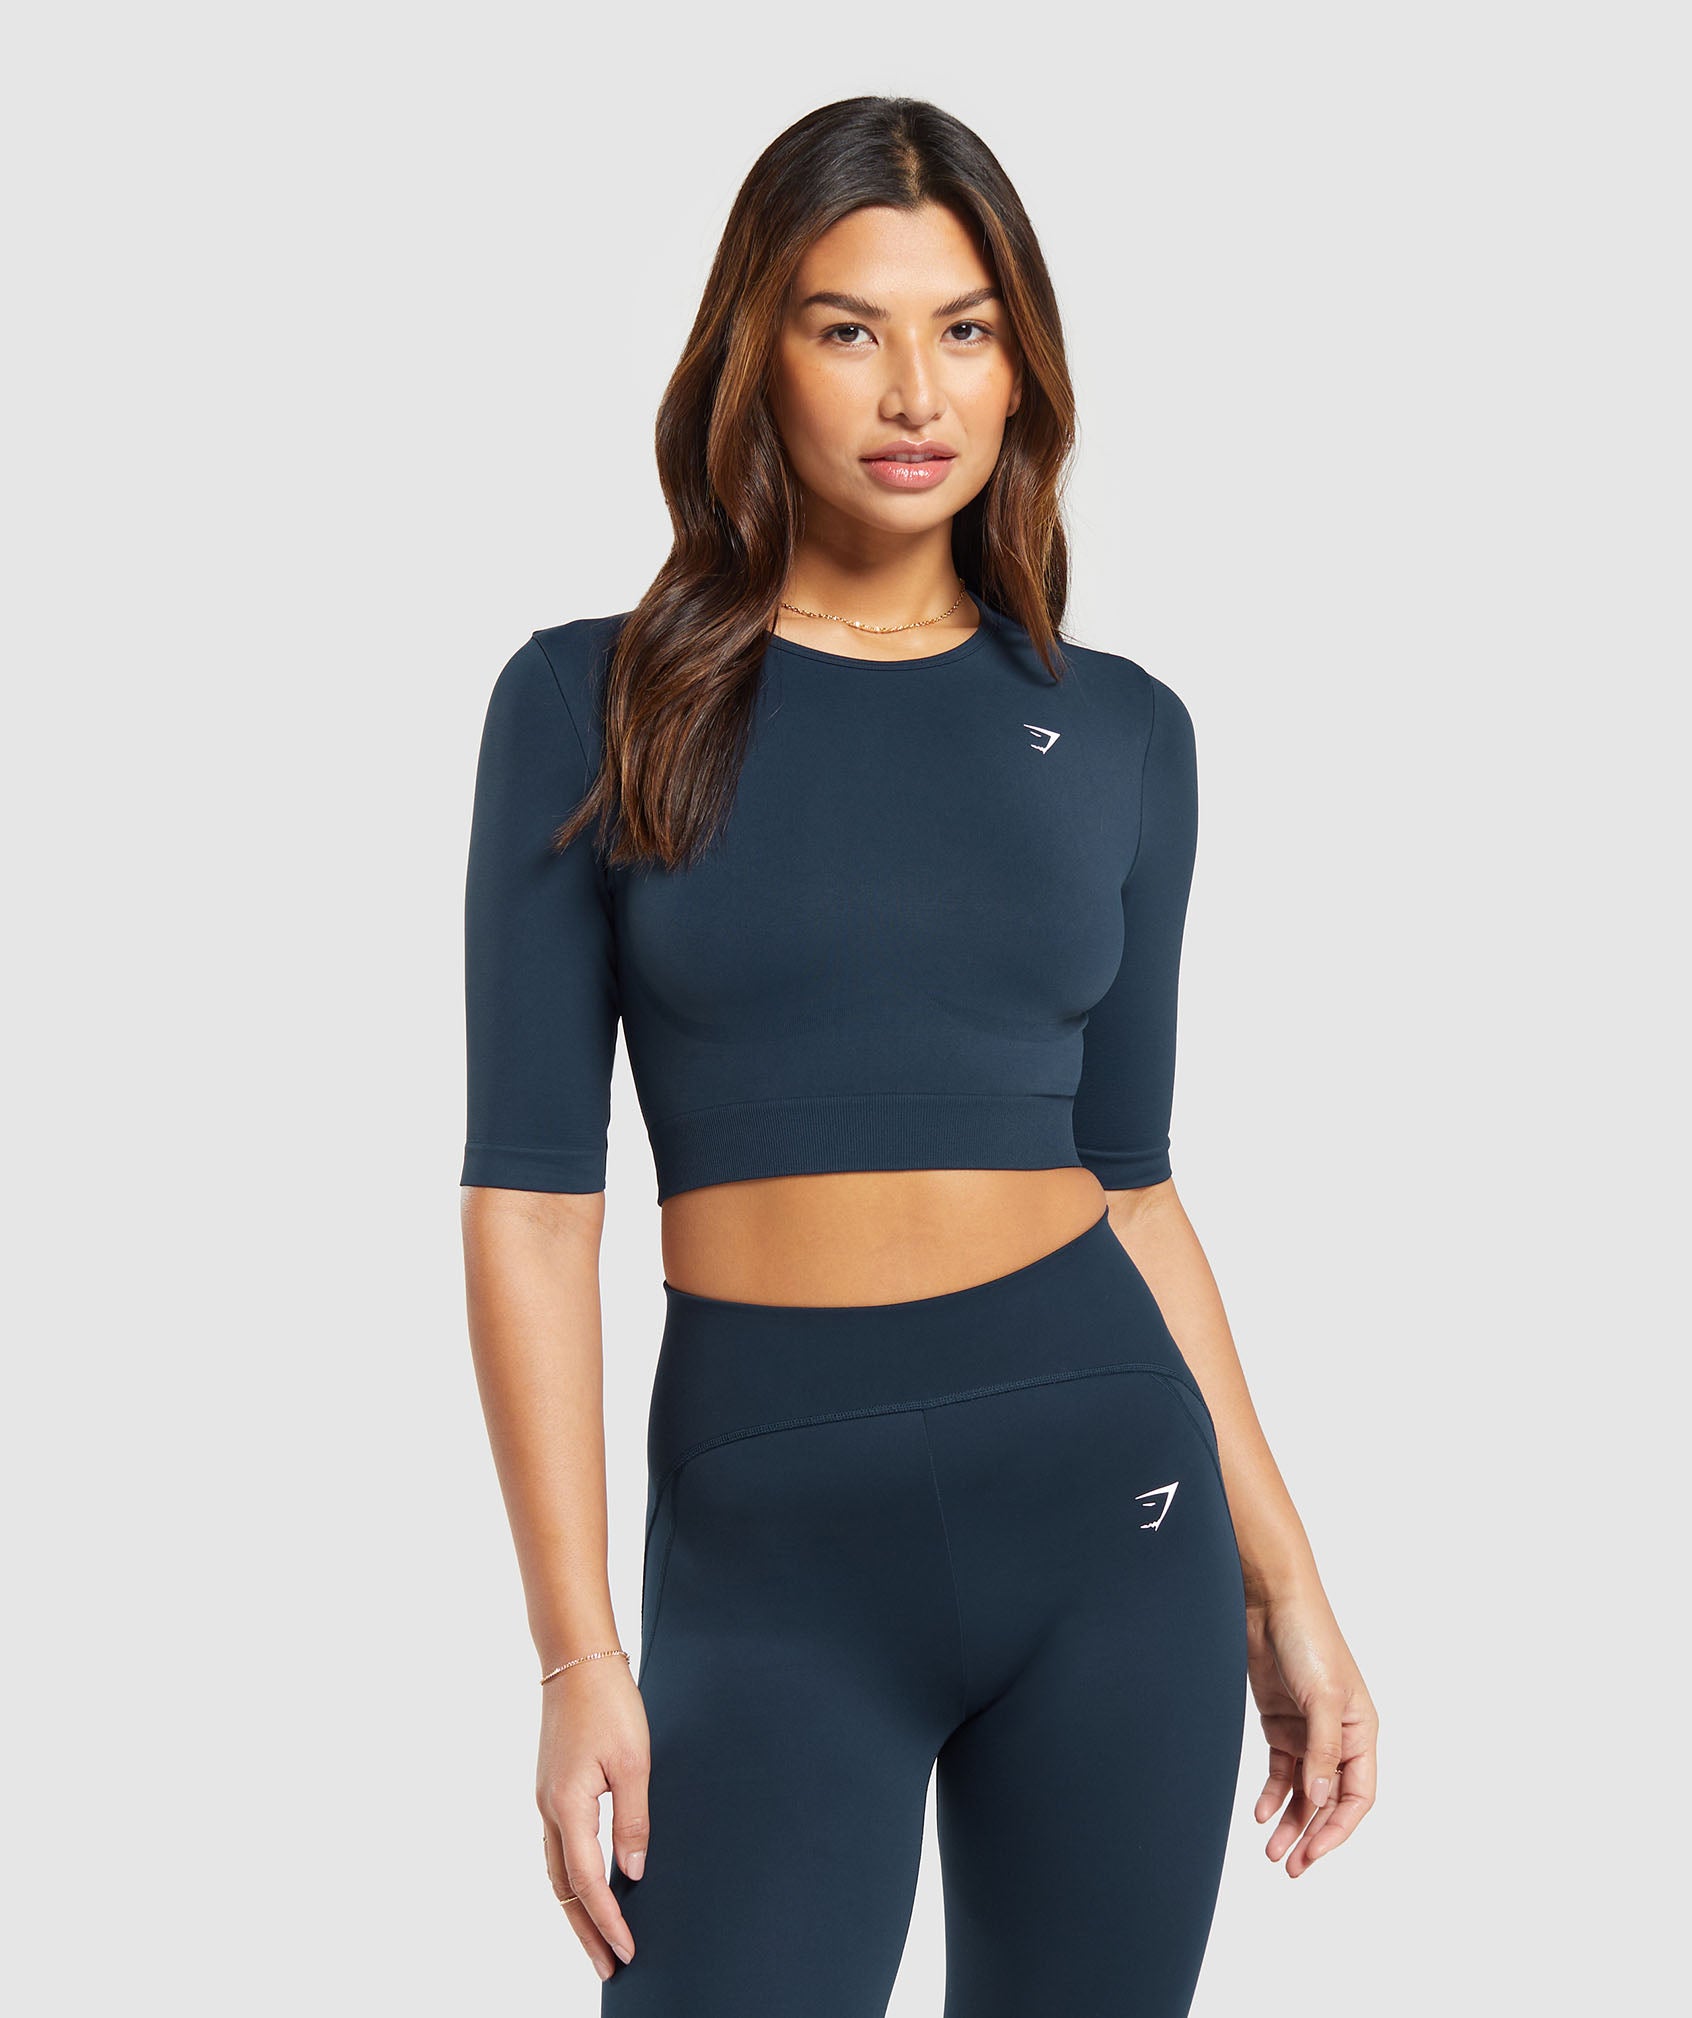 Everyday Seamless Crop Top in Navy - view 1